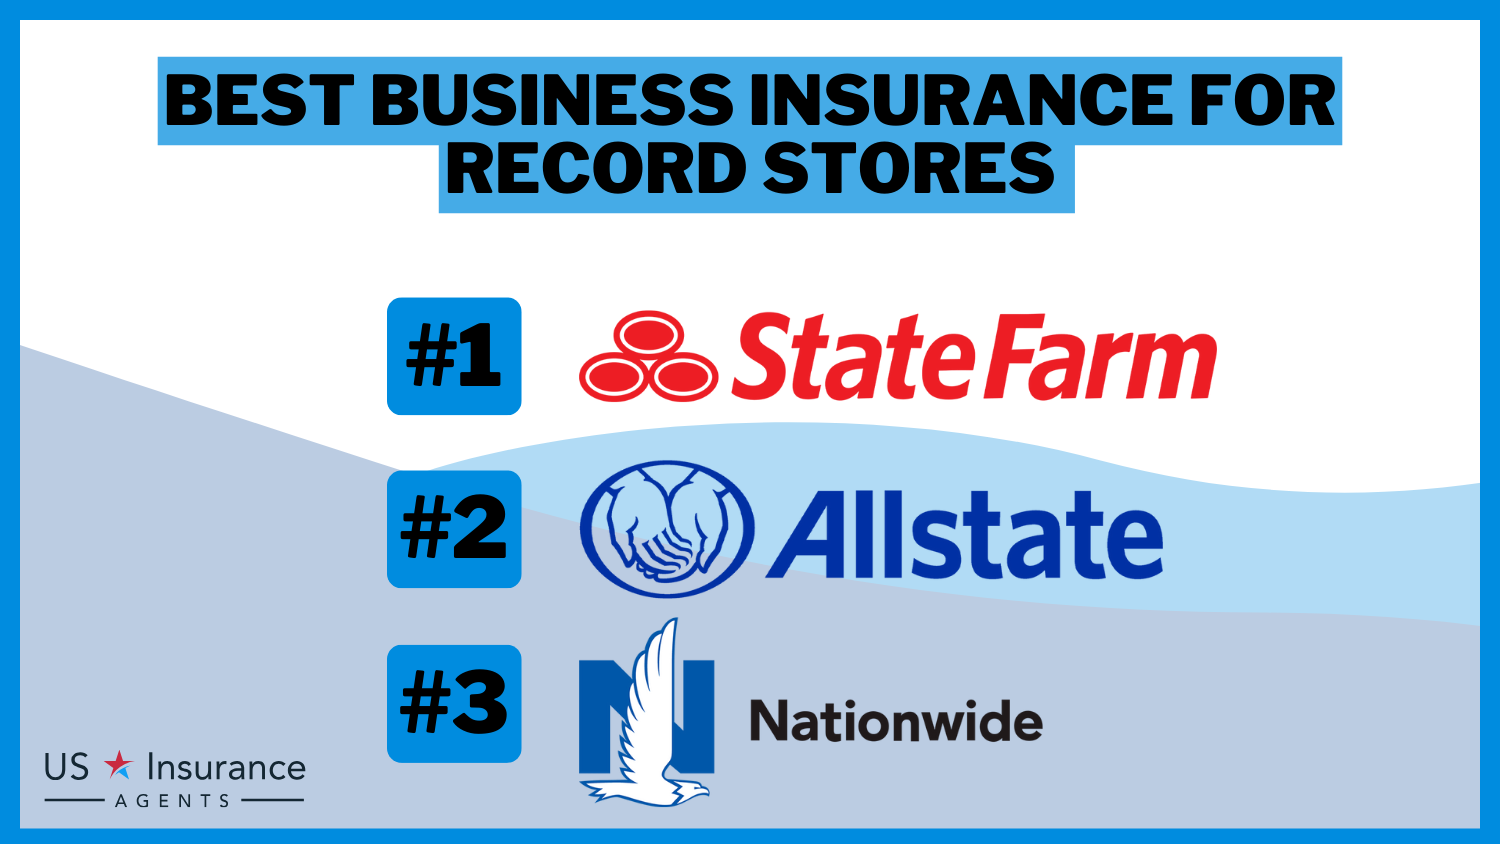 State Farm, Allstate, Nationwide: Best Business Insurance for Record Stores